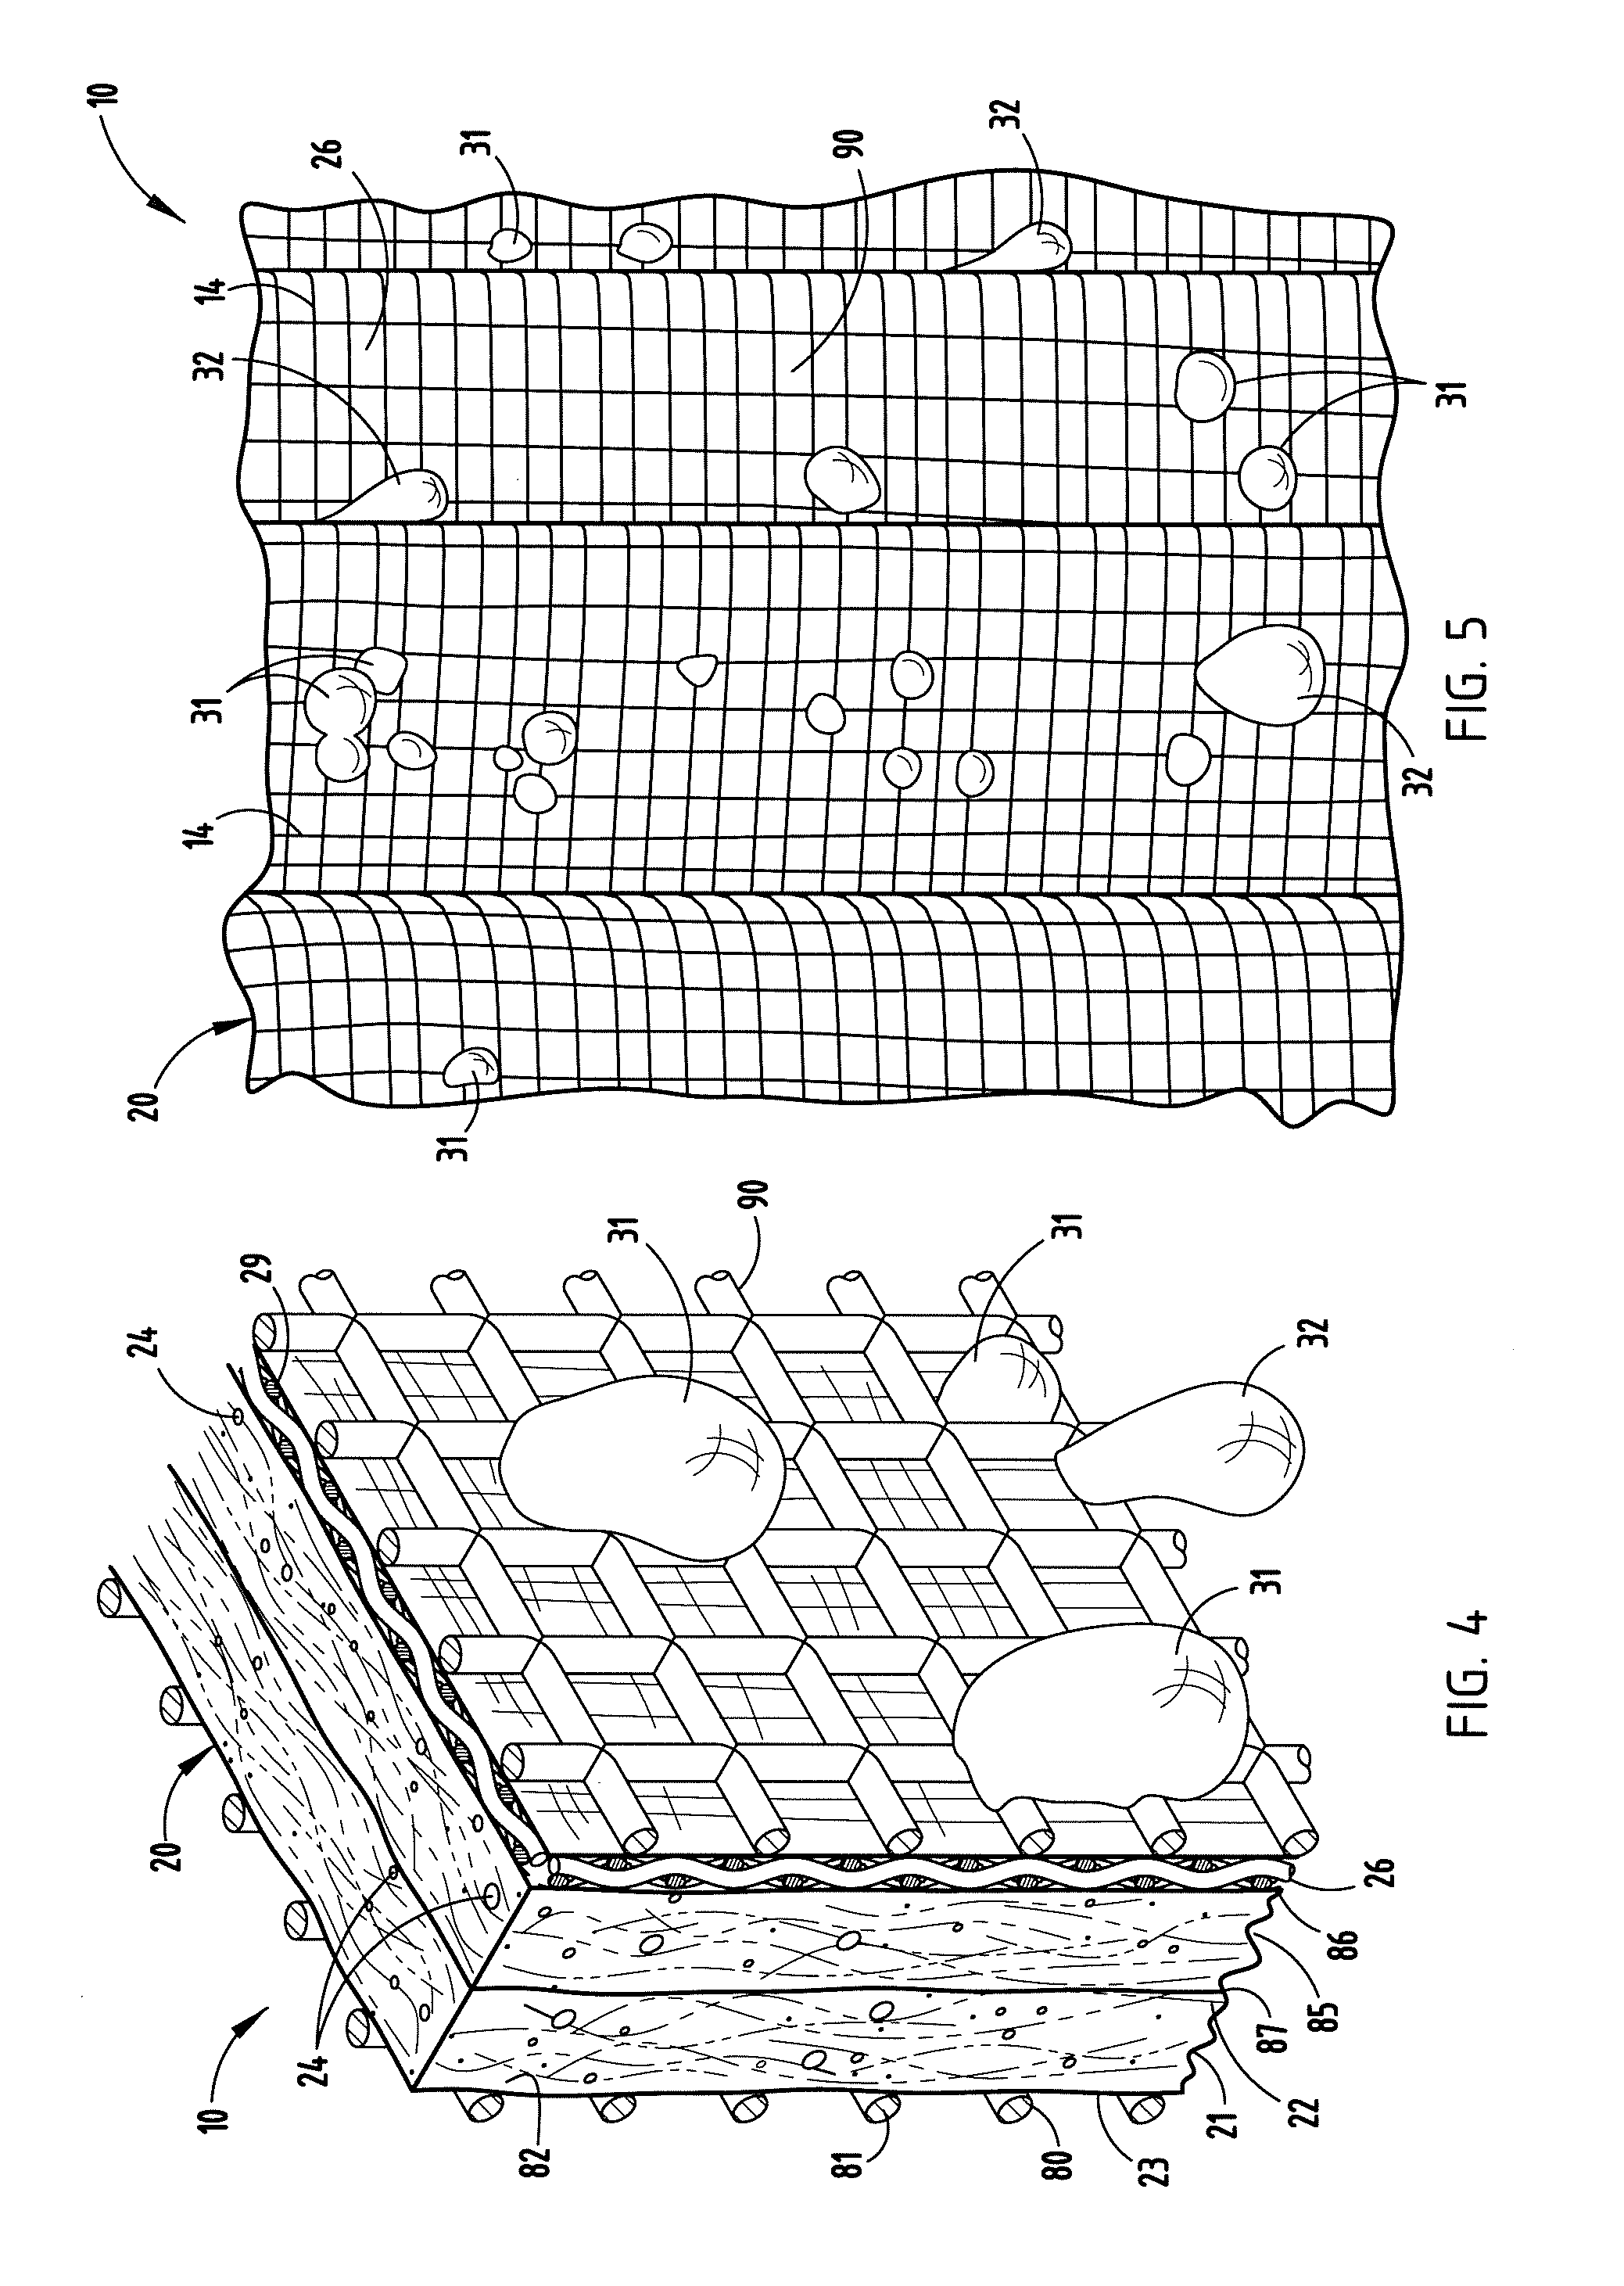 Apparatus and method for removing contaminants from industrial fluids